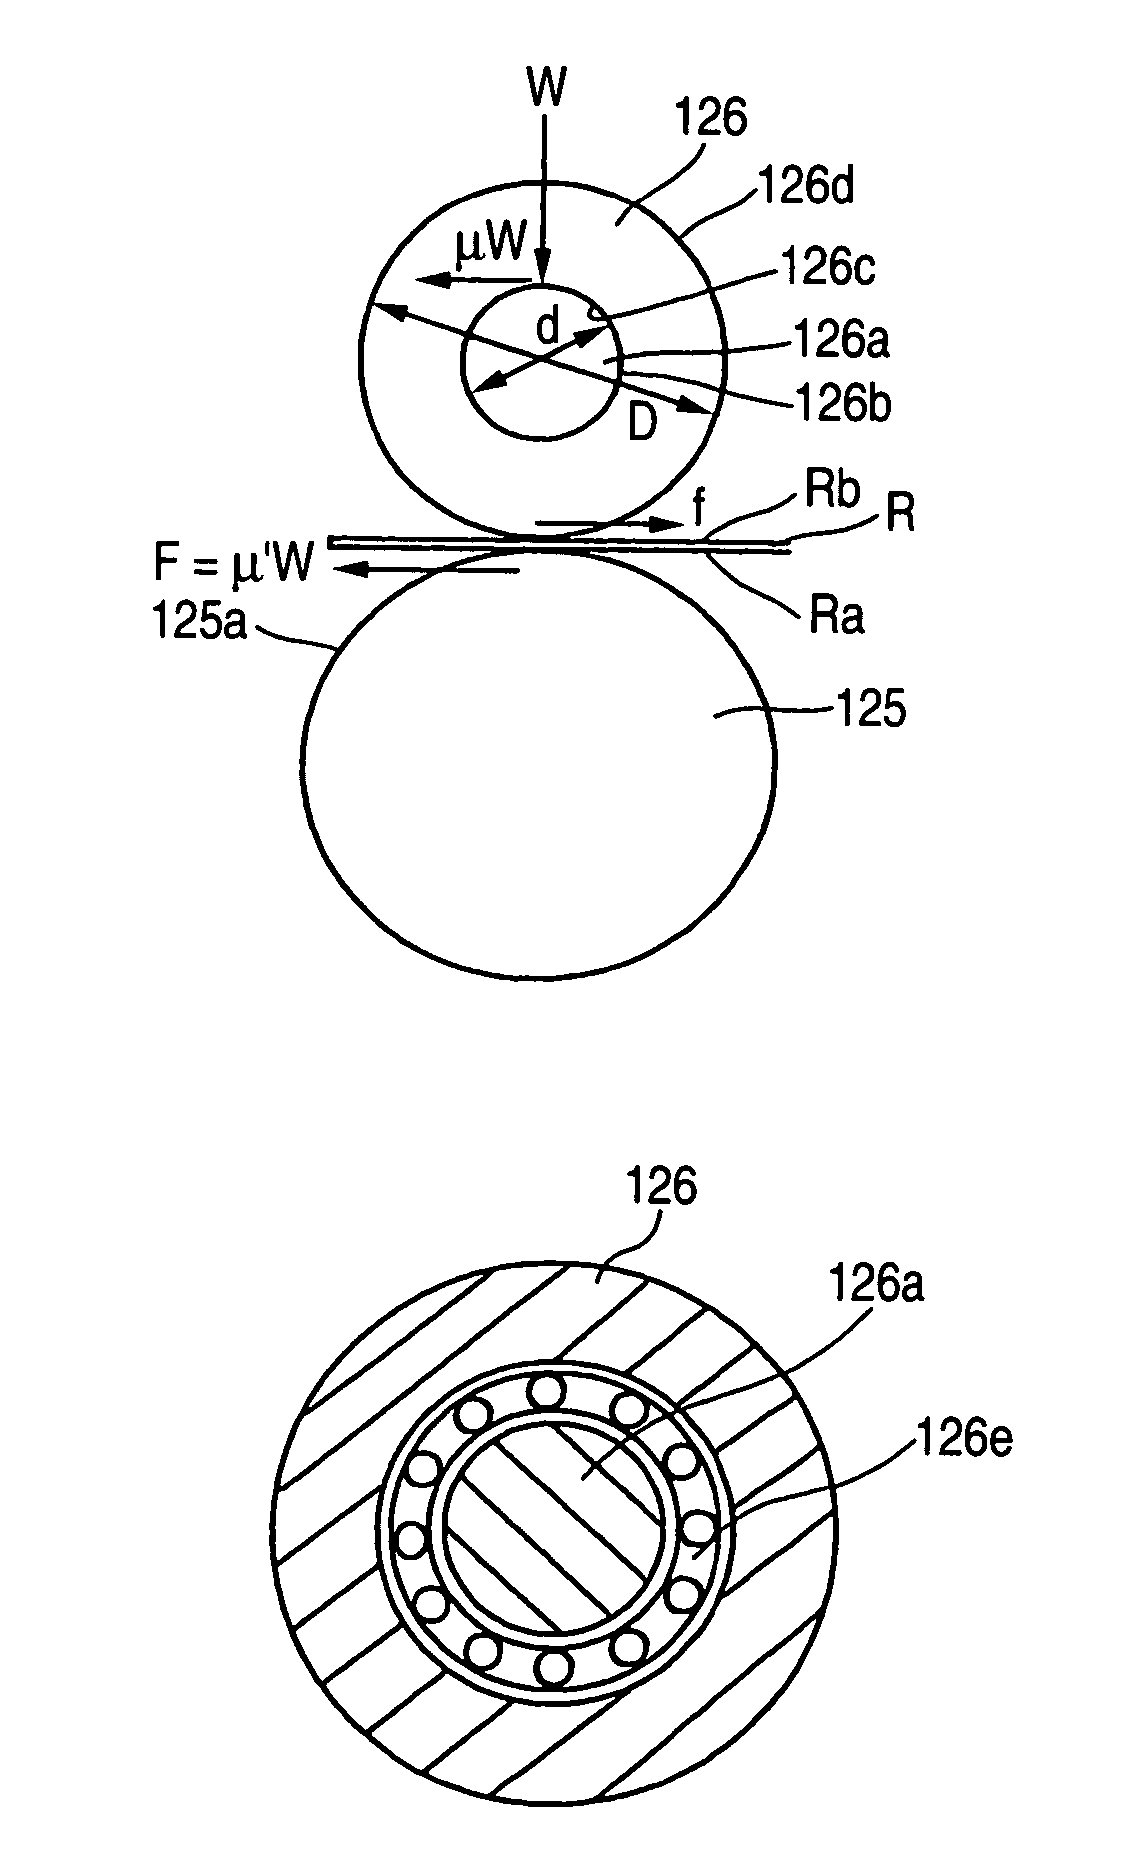 Medium transporting device and recording apparatus incorporating the same